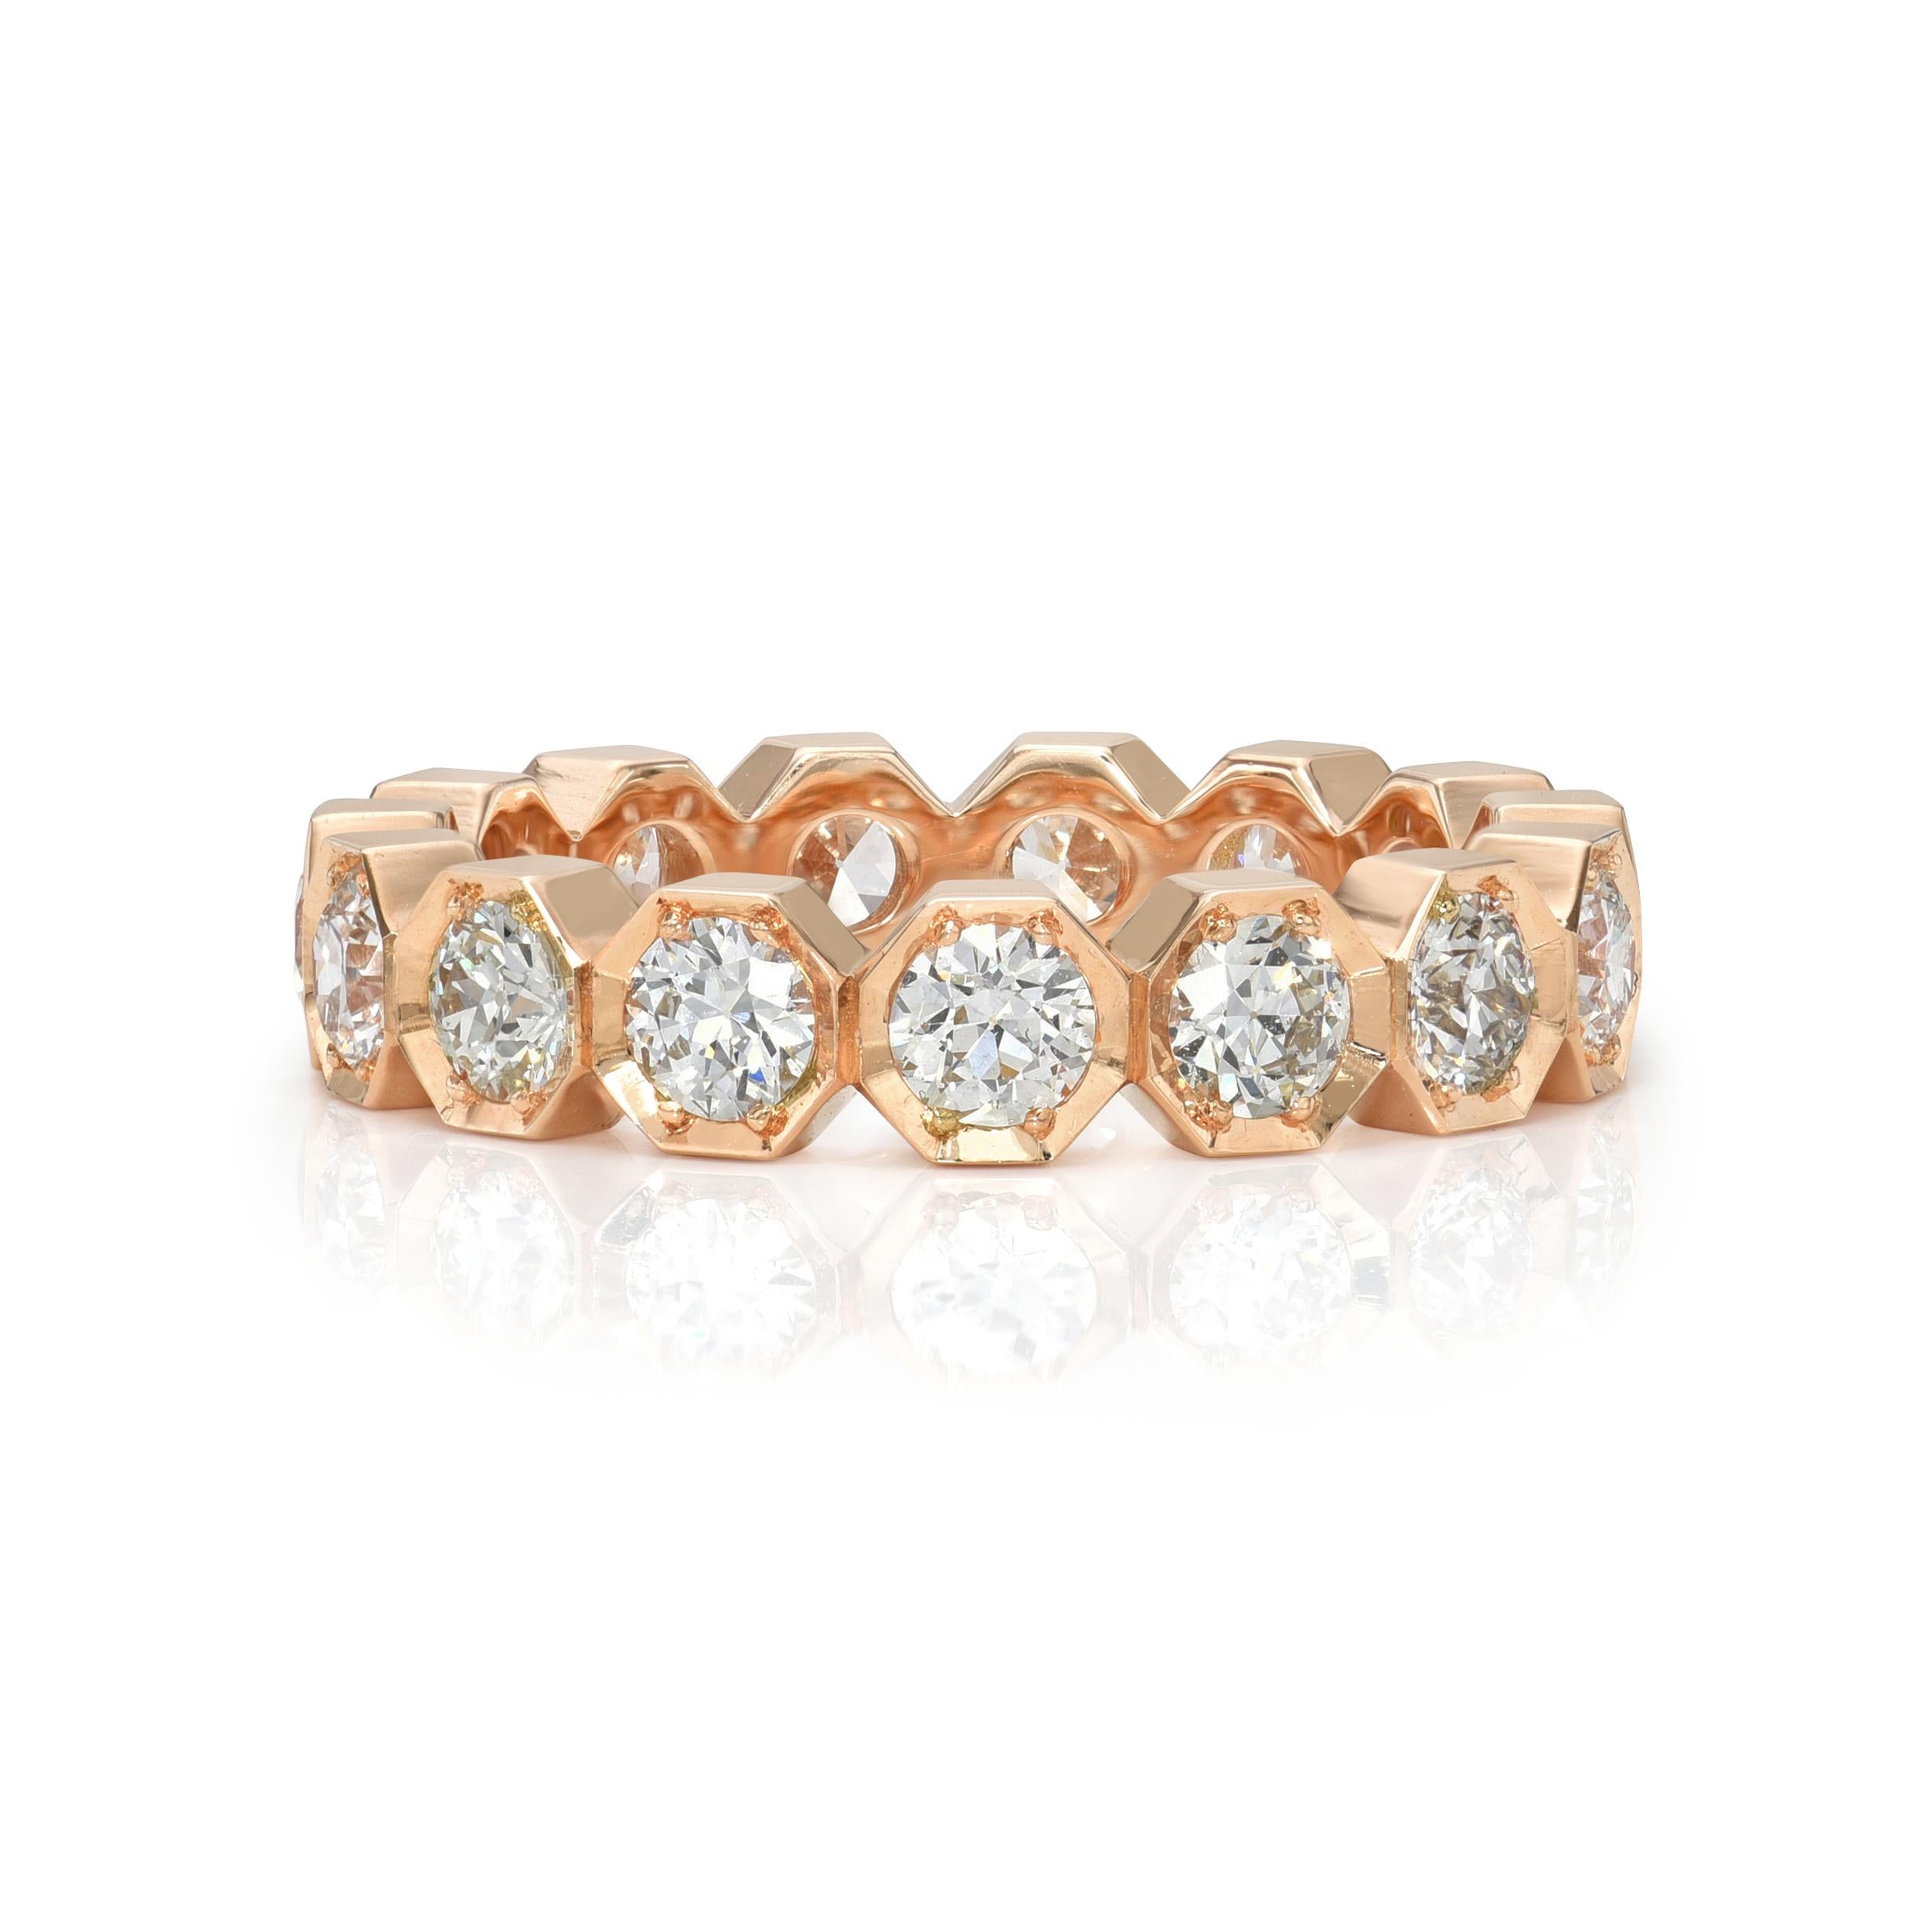 For Sale:  Handcrafted Gemma Old European Cut Diamond Eternity Band by Single Stone 2